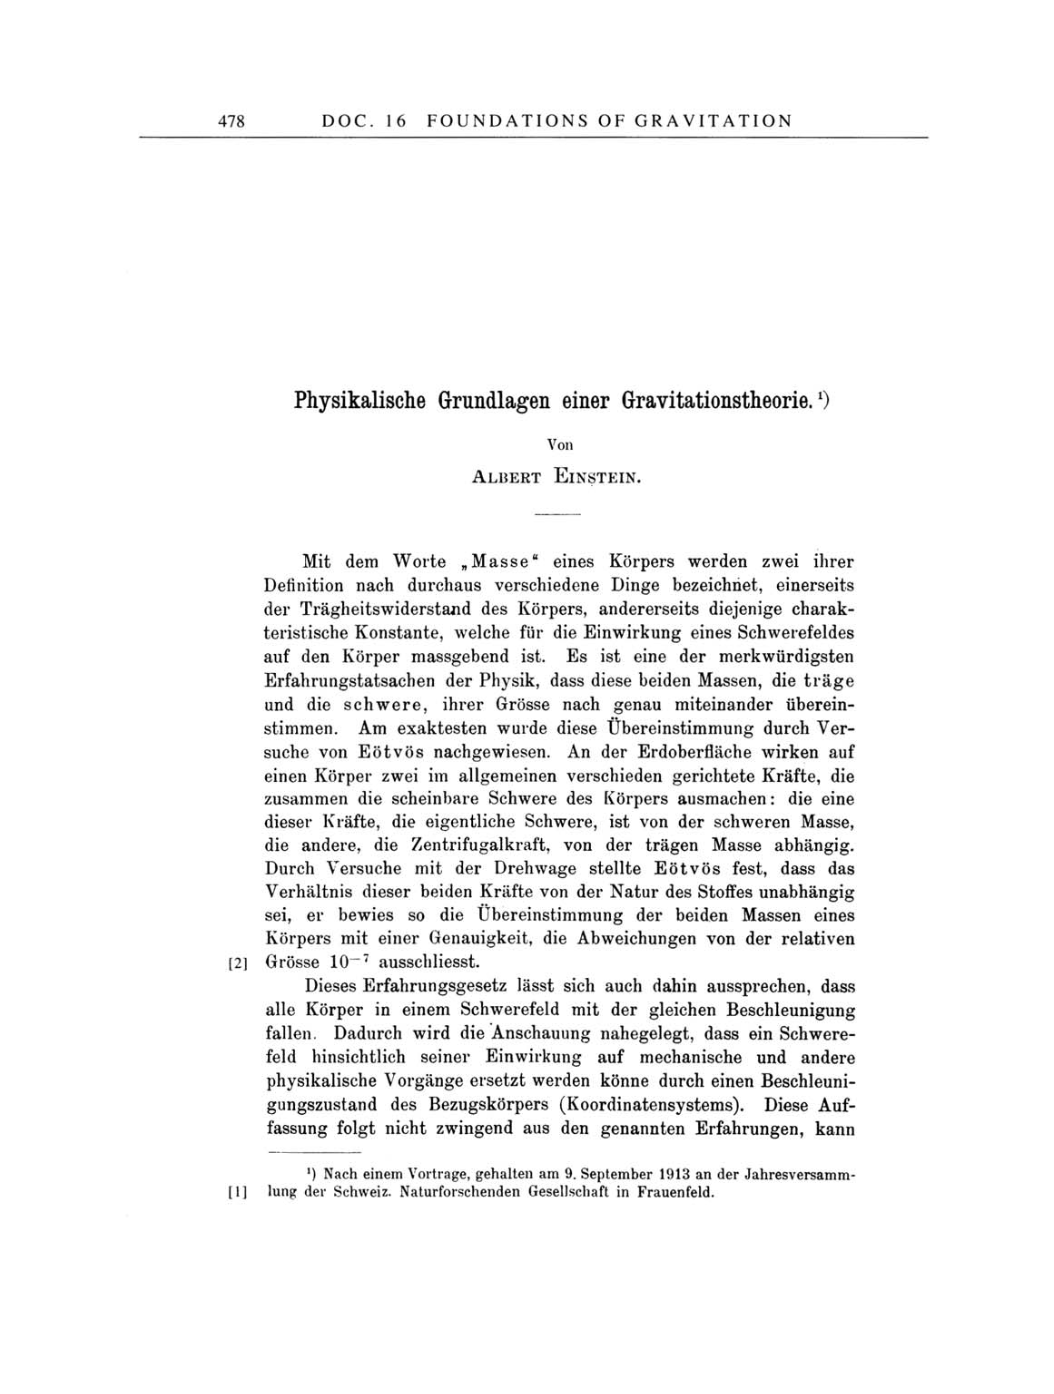 Volume 4: The Swiss Years: Writings 1912-1914 page 478